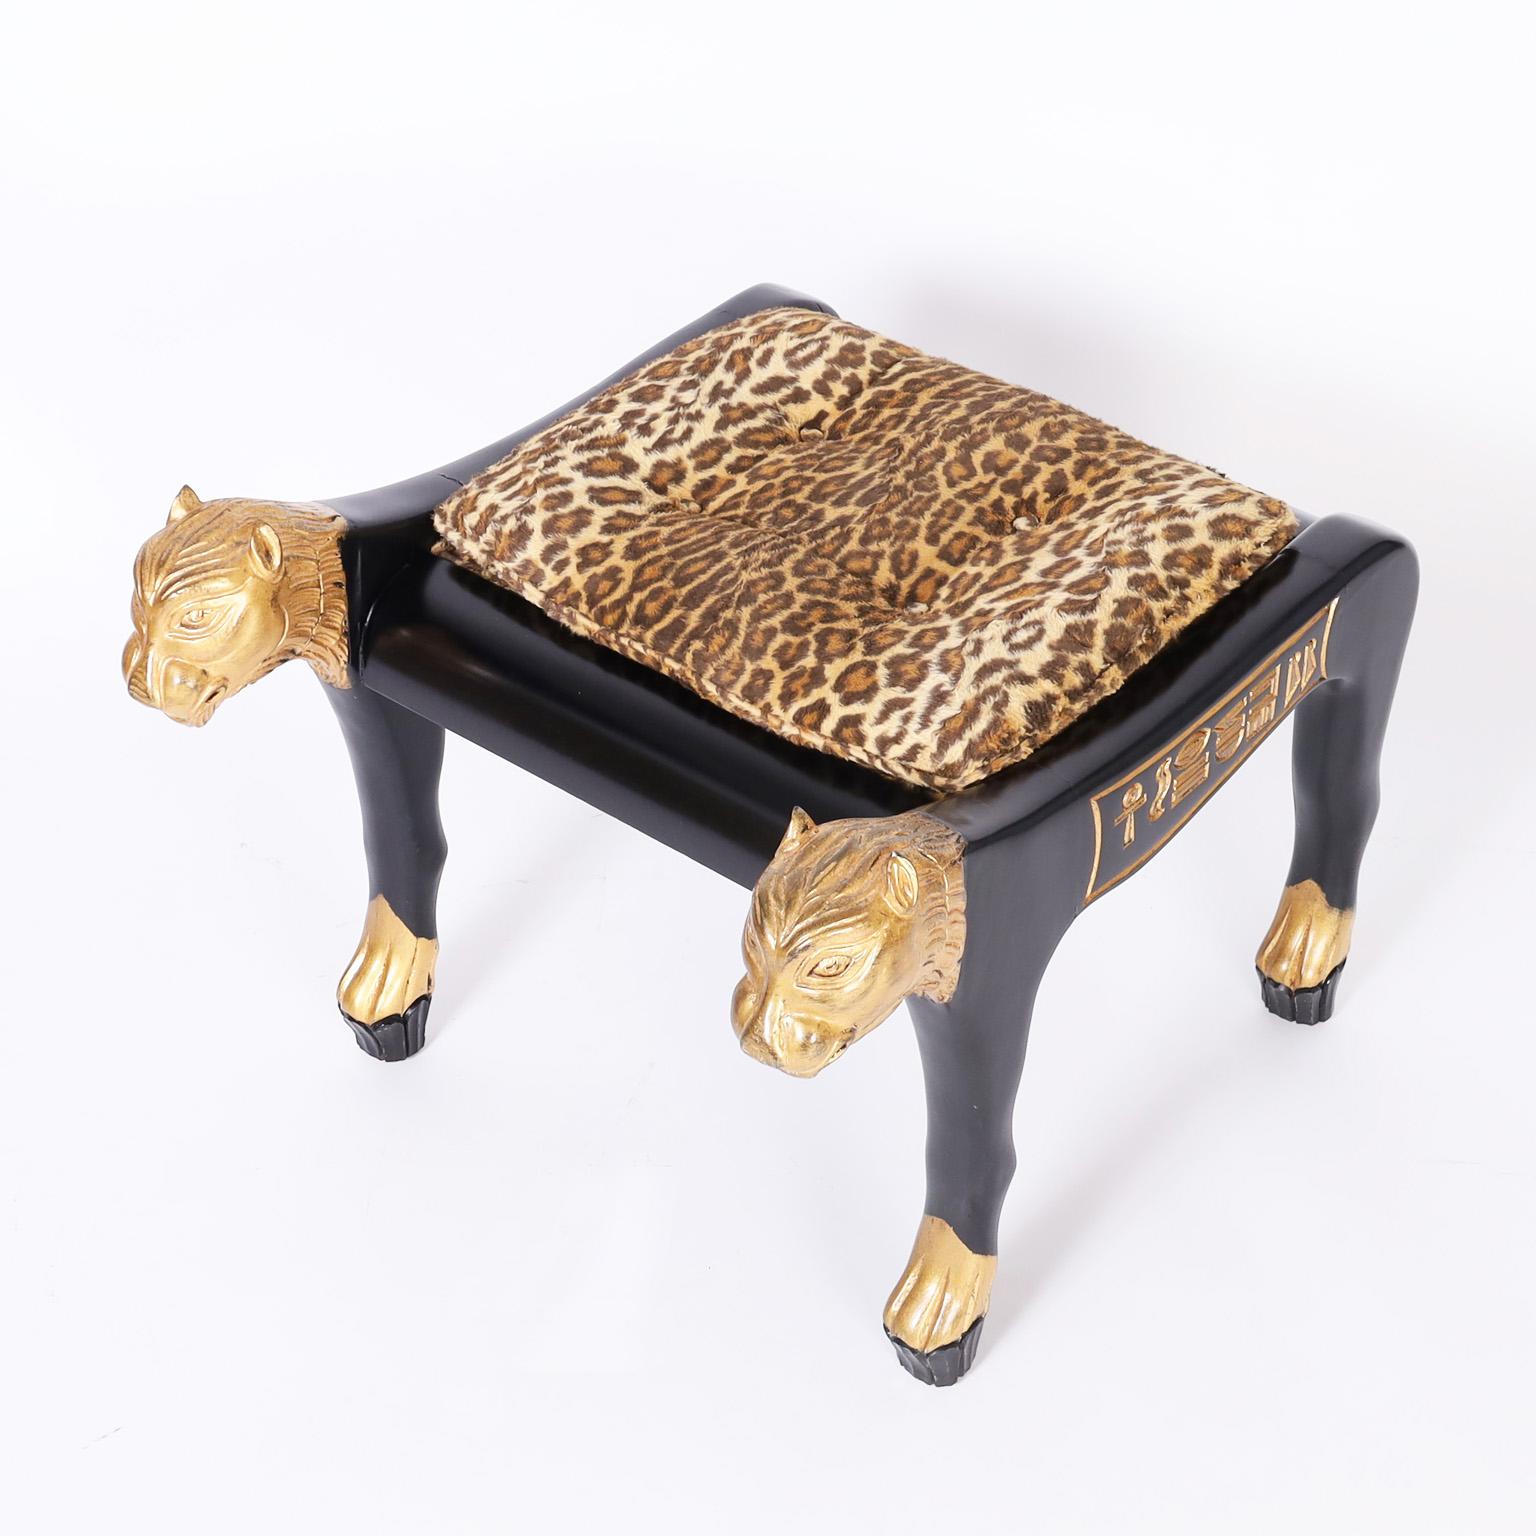 Egyptian style bench featuring button tufted upholstery in faux leopard over an ebonized carved wood base with gilt cat heads, feet, and hieroglyphics.